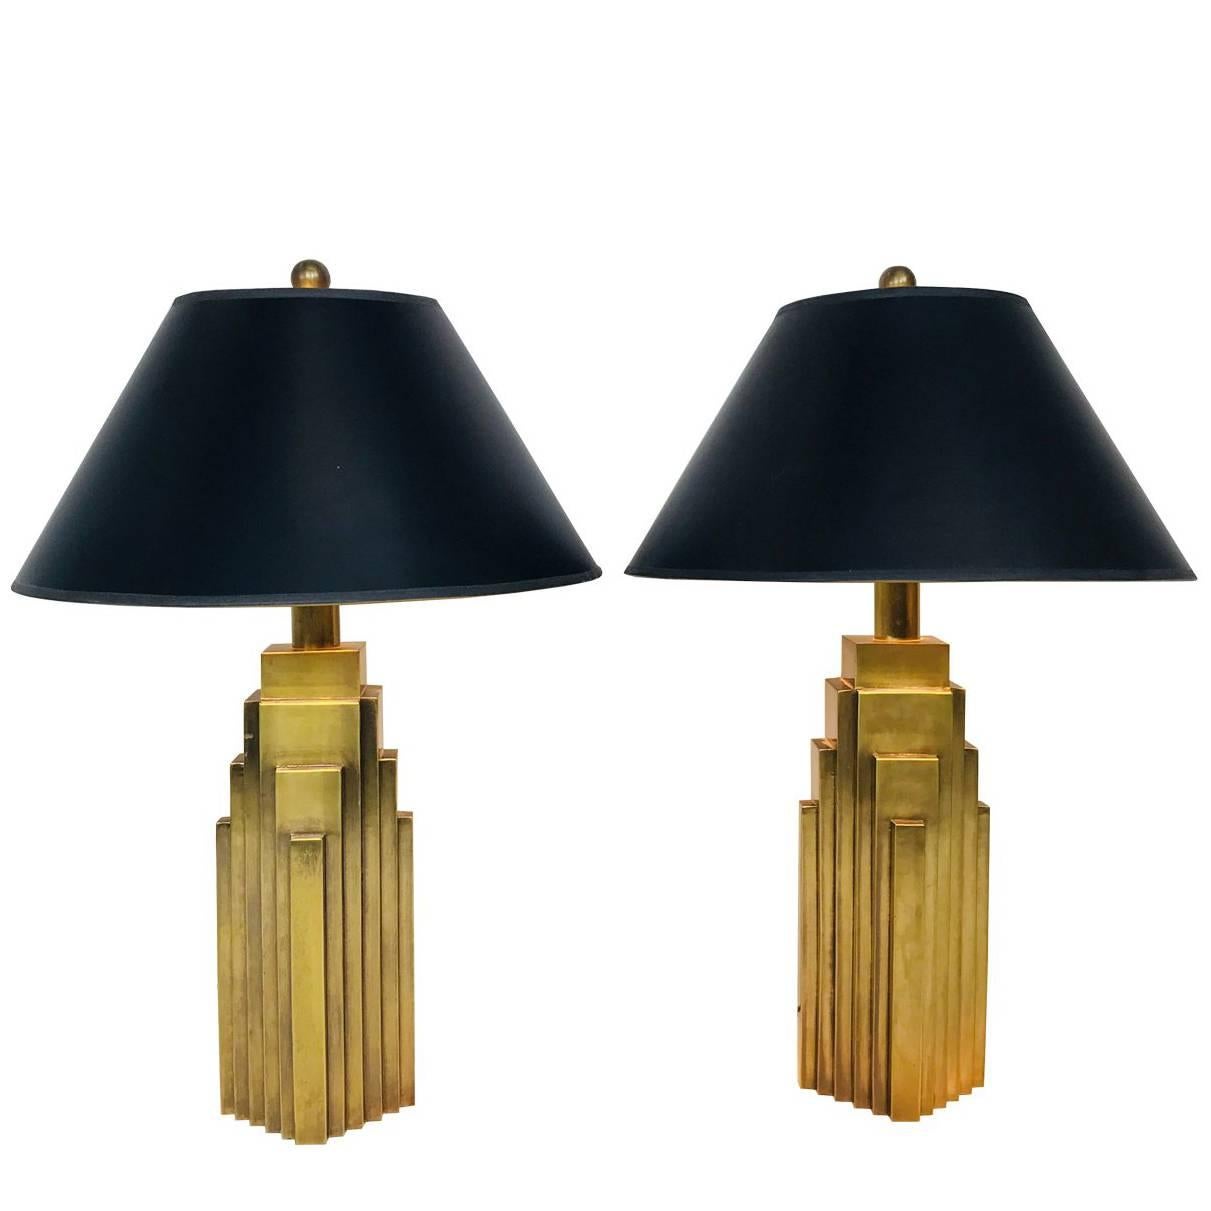 Pair of Brass Skyscraper Table Lamps with Black Shades by Chapman